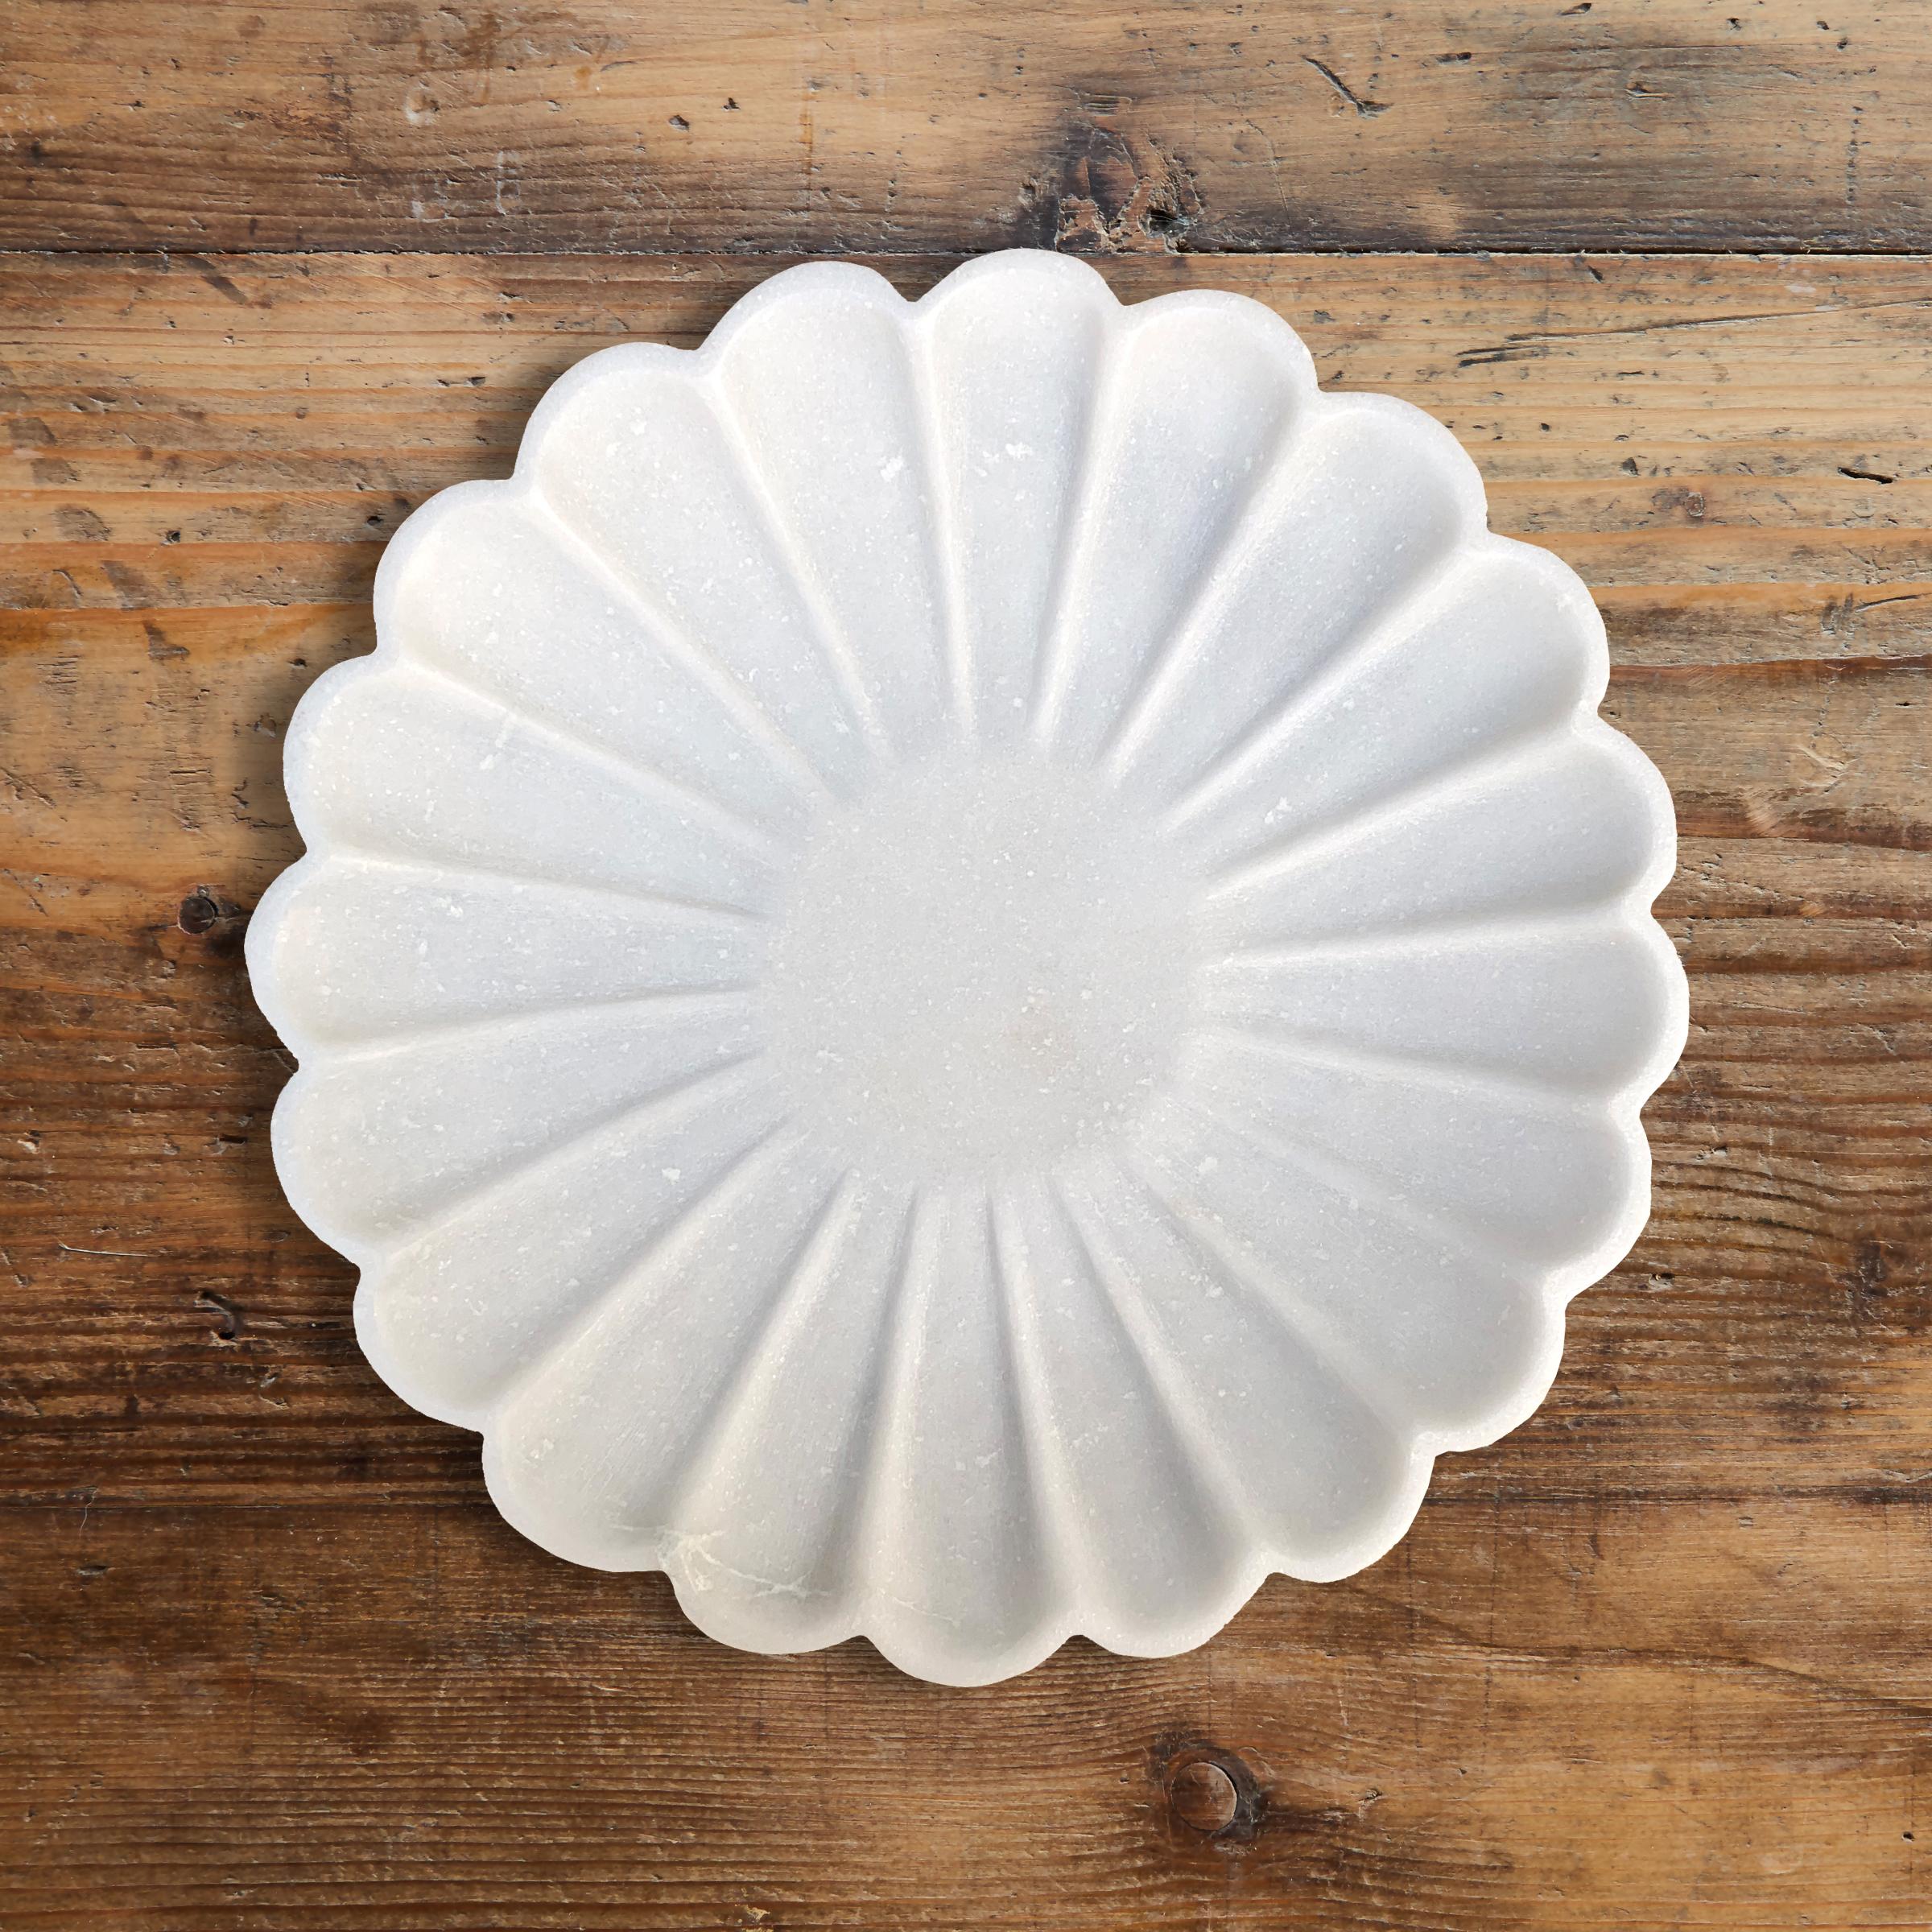 A beautifully carved marble flower form shallow dish. perfect for catching keys, coins, or myriad other things in the kitchen, bathroom, or dressing room.